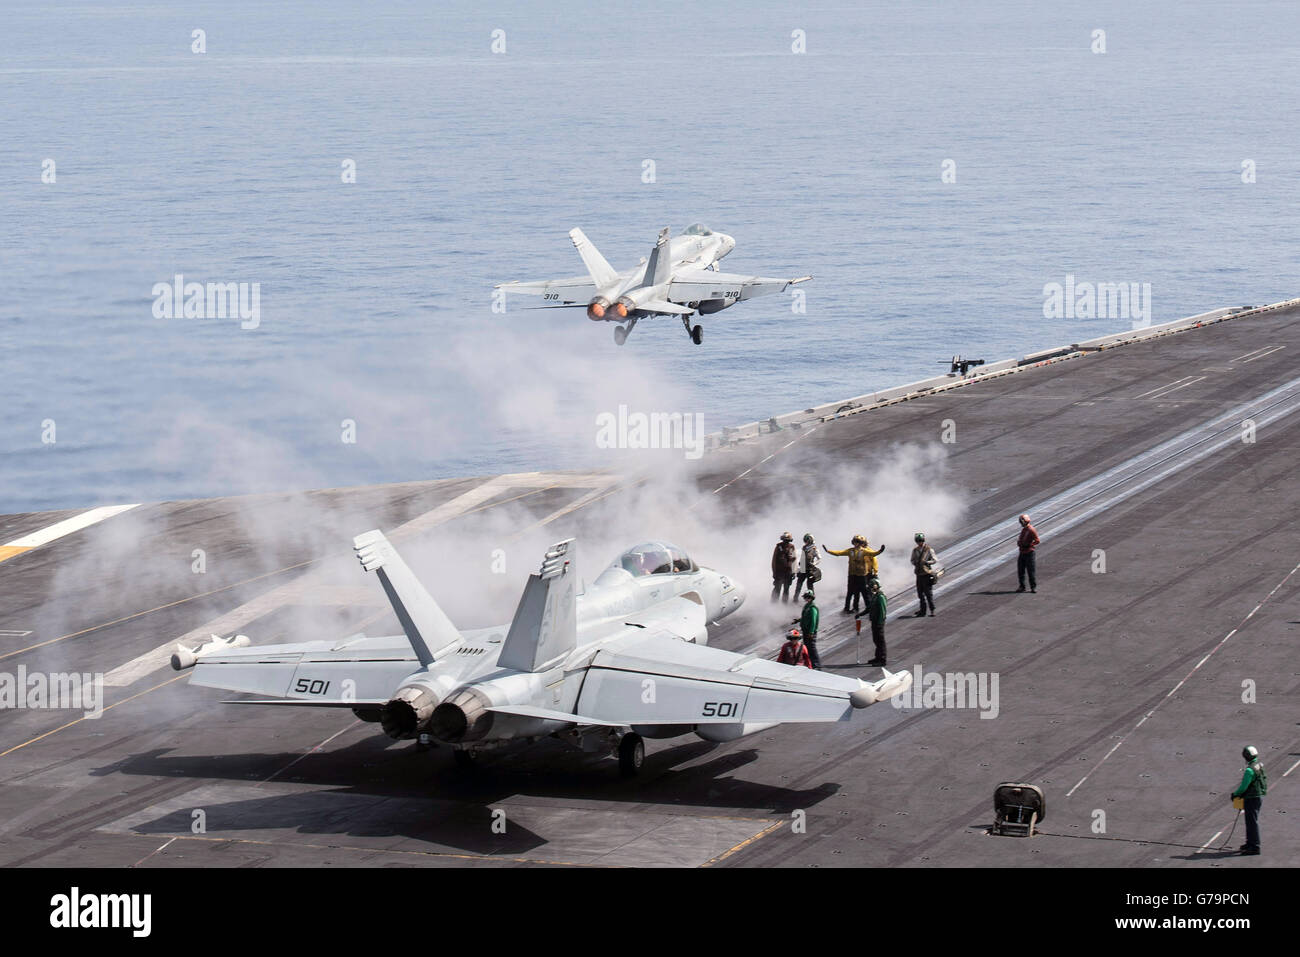 A US Navy F/A-18C Hornet fighter aircraft launches from the flight deck of the aircraft carrier USS Harry S. Truman at June 14, 2016 in the Mediterranean Sea. Stock Photo